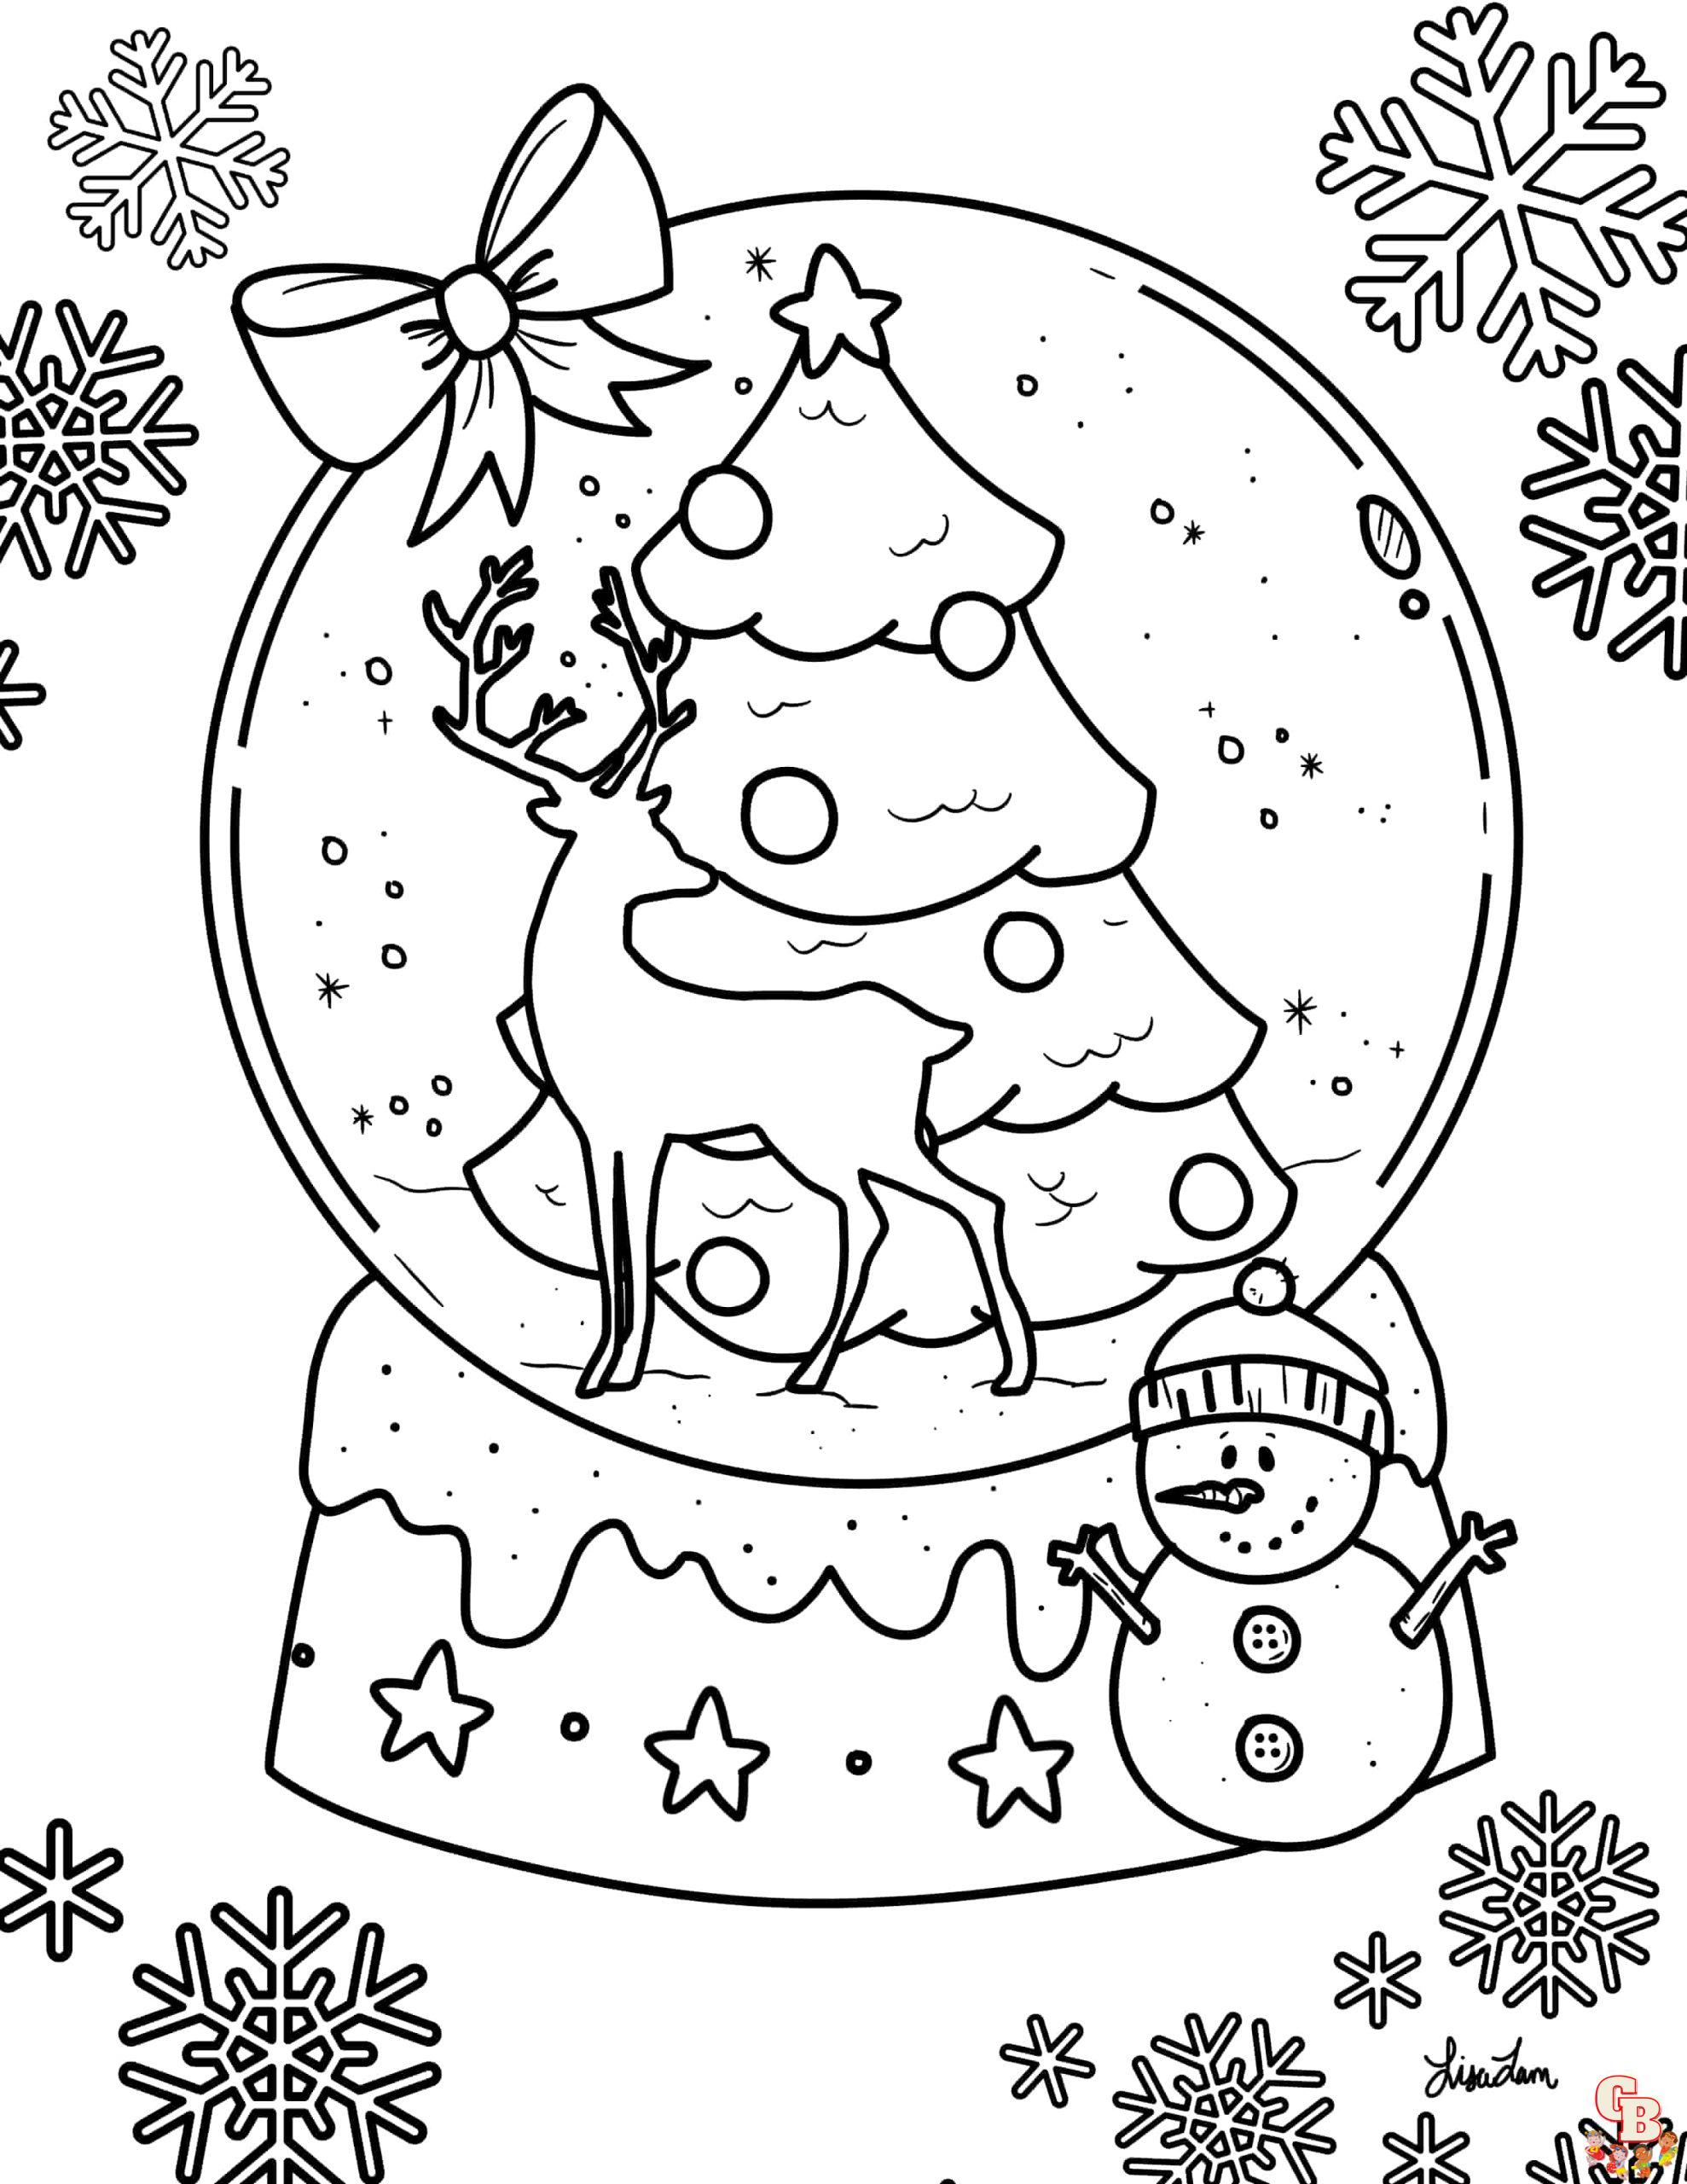 Snowglobe Coloring Pages 3